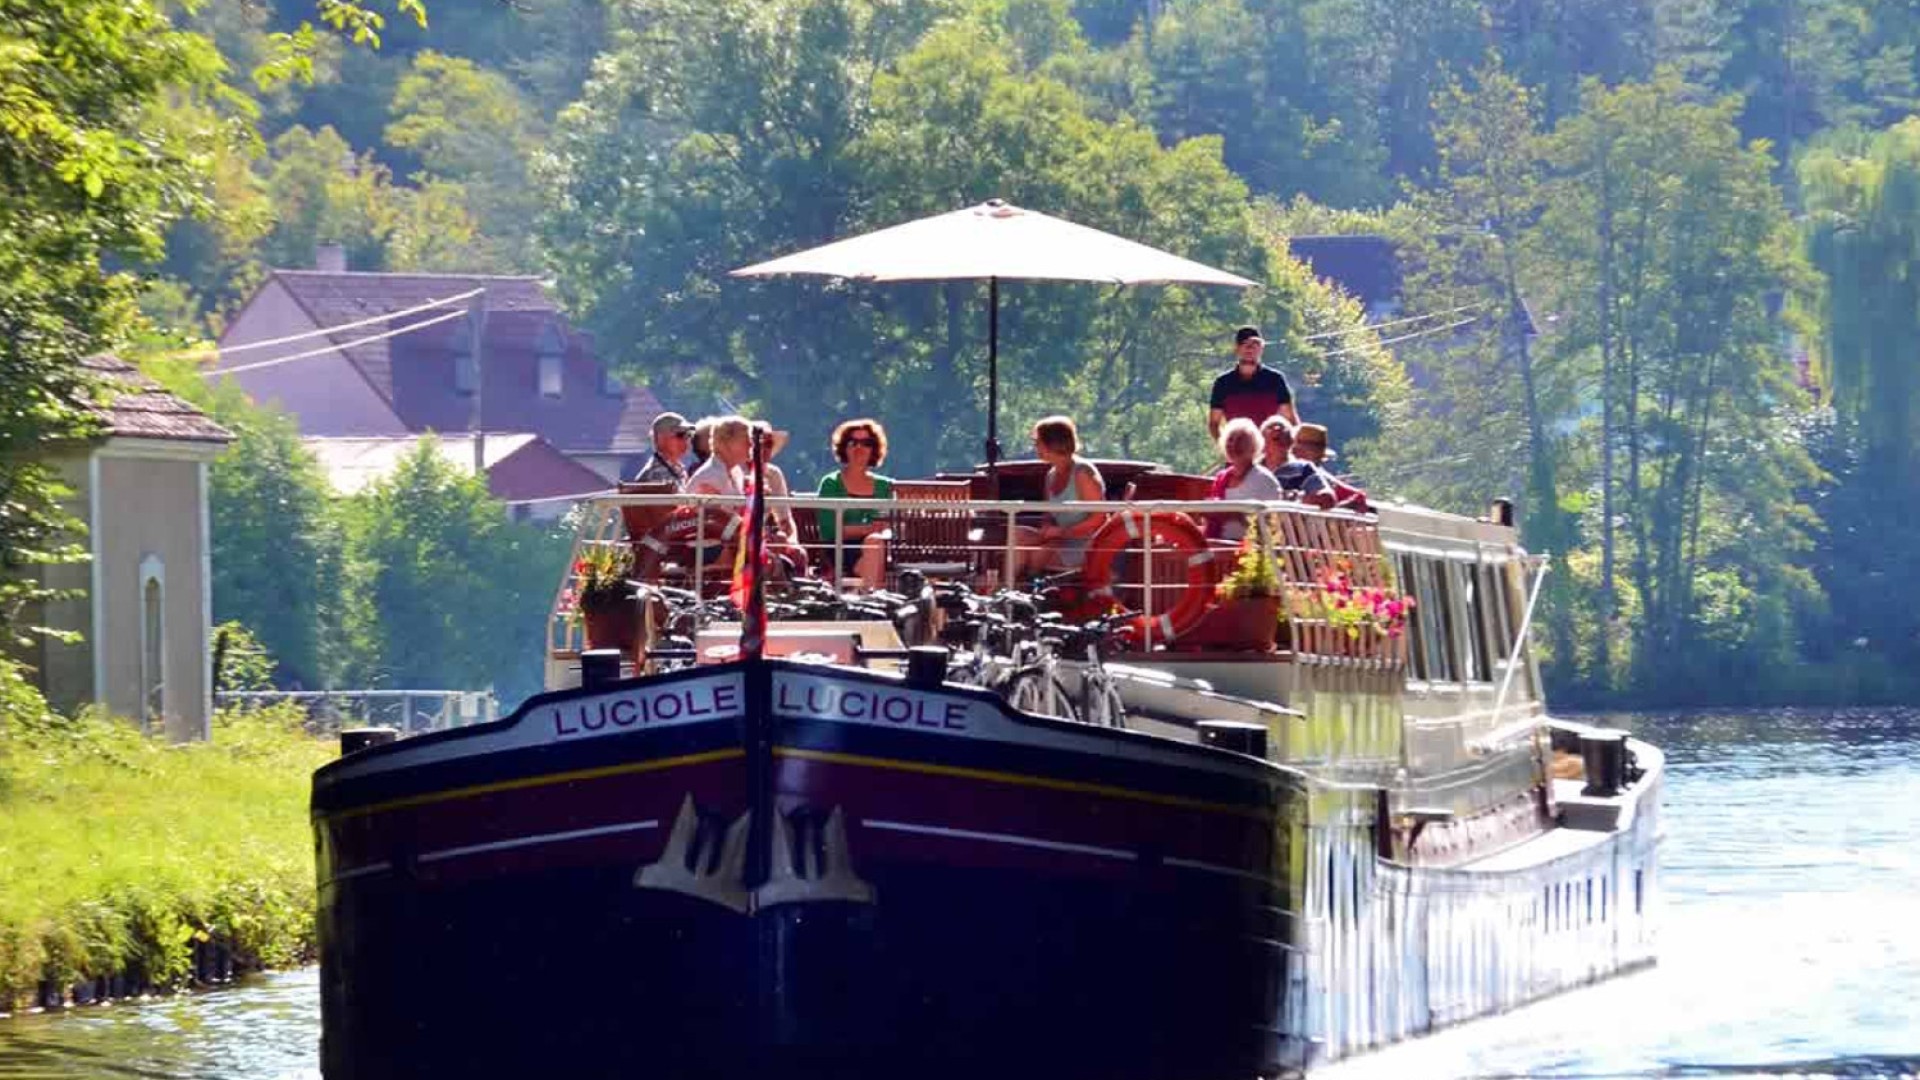 People sitting in circle under an umbrella on the luciole barge on a sunny day in a French canal